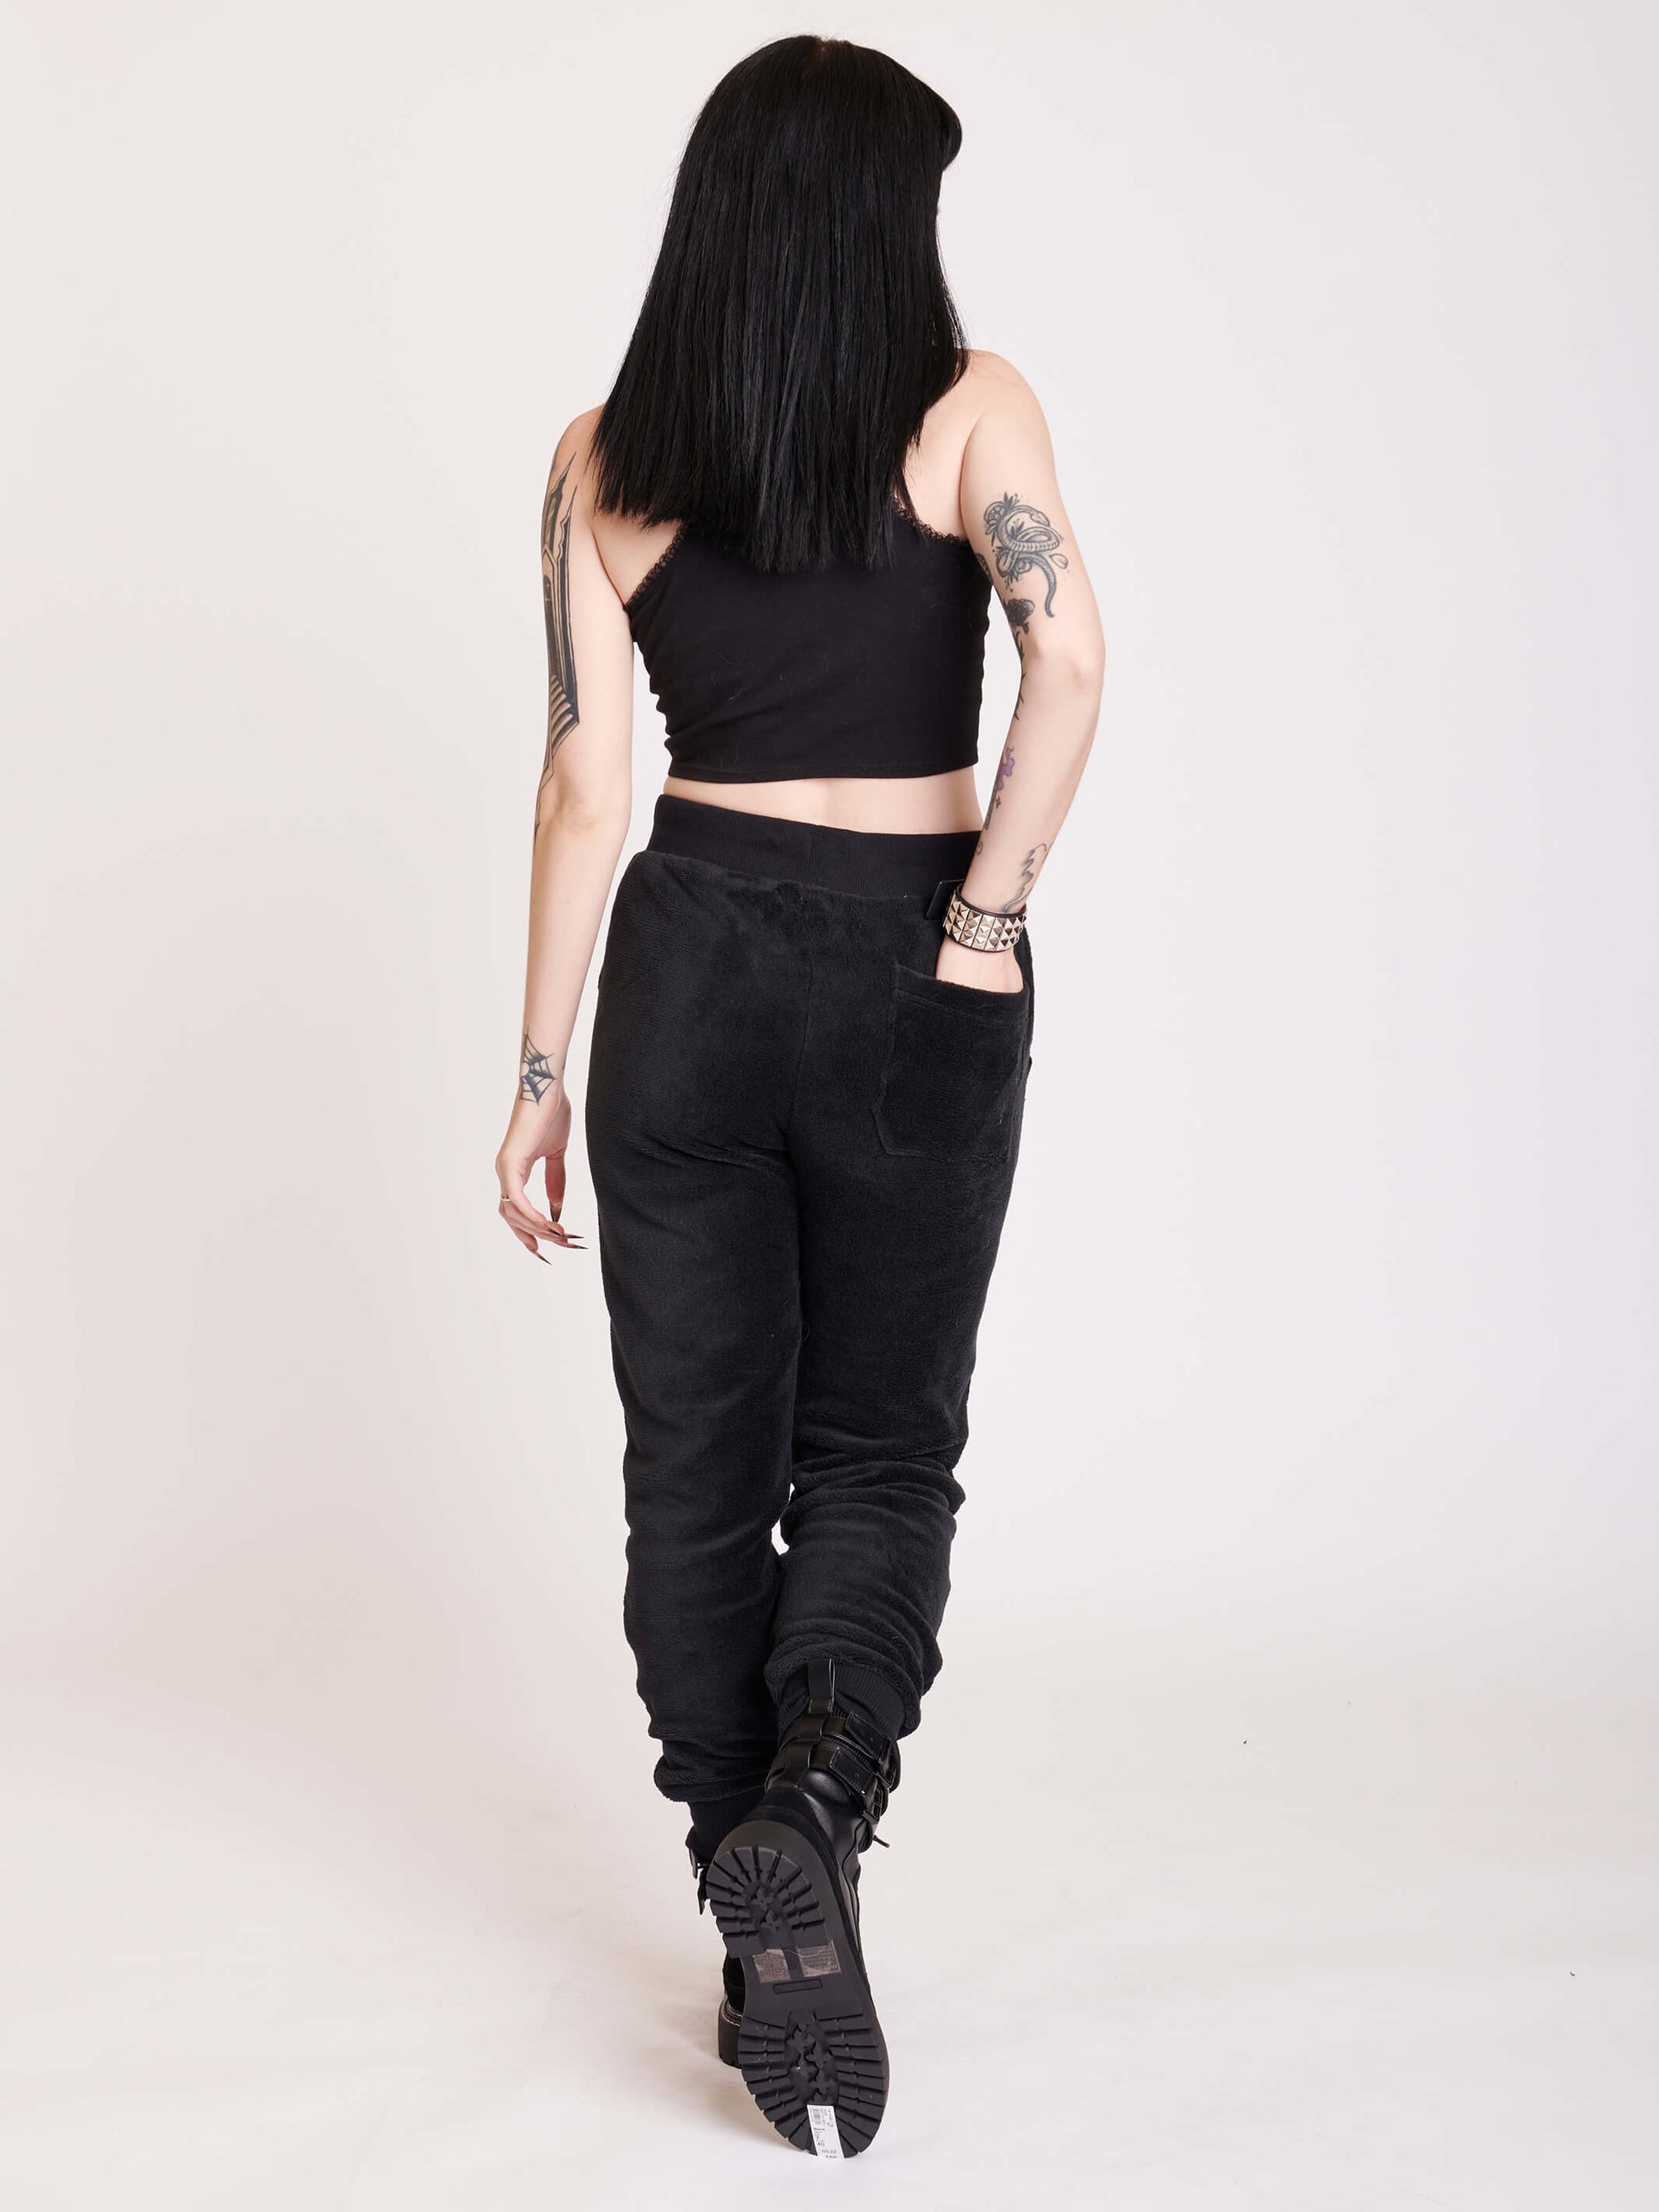 Super soft joggers with embroidered witchy graphics